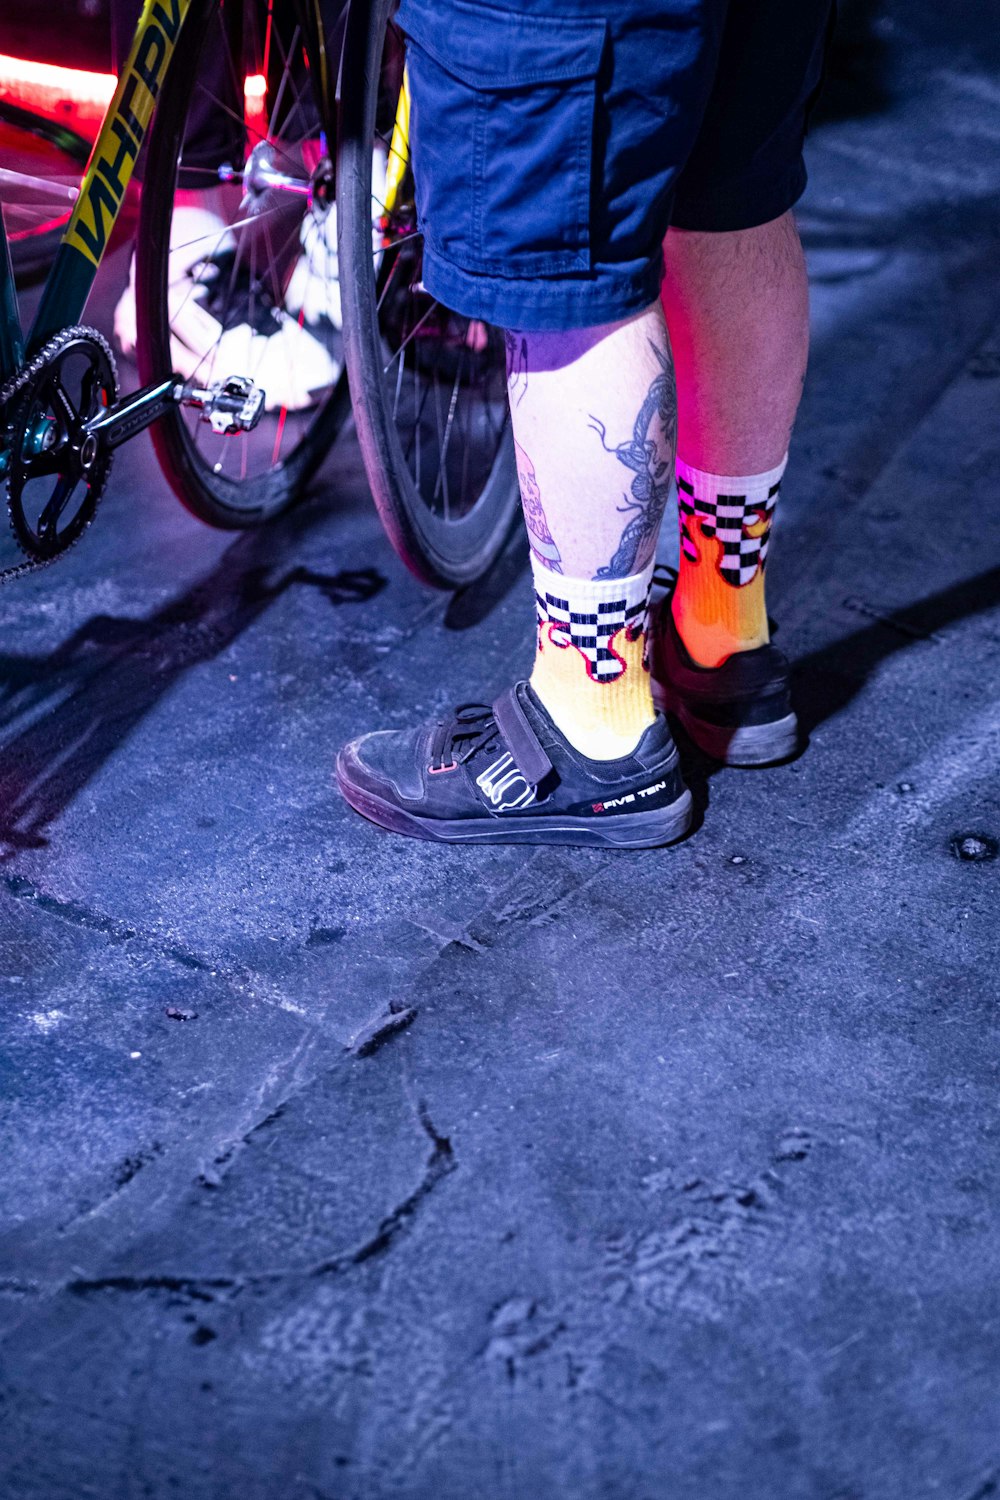 a person wearing colorful socks and socks standing next to a bike